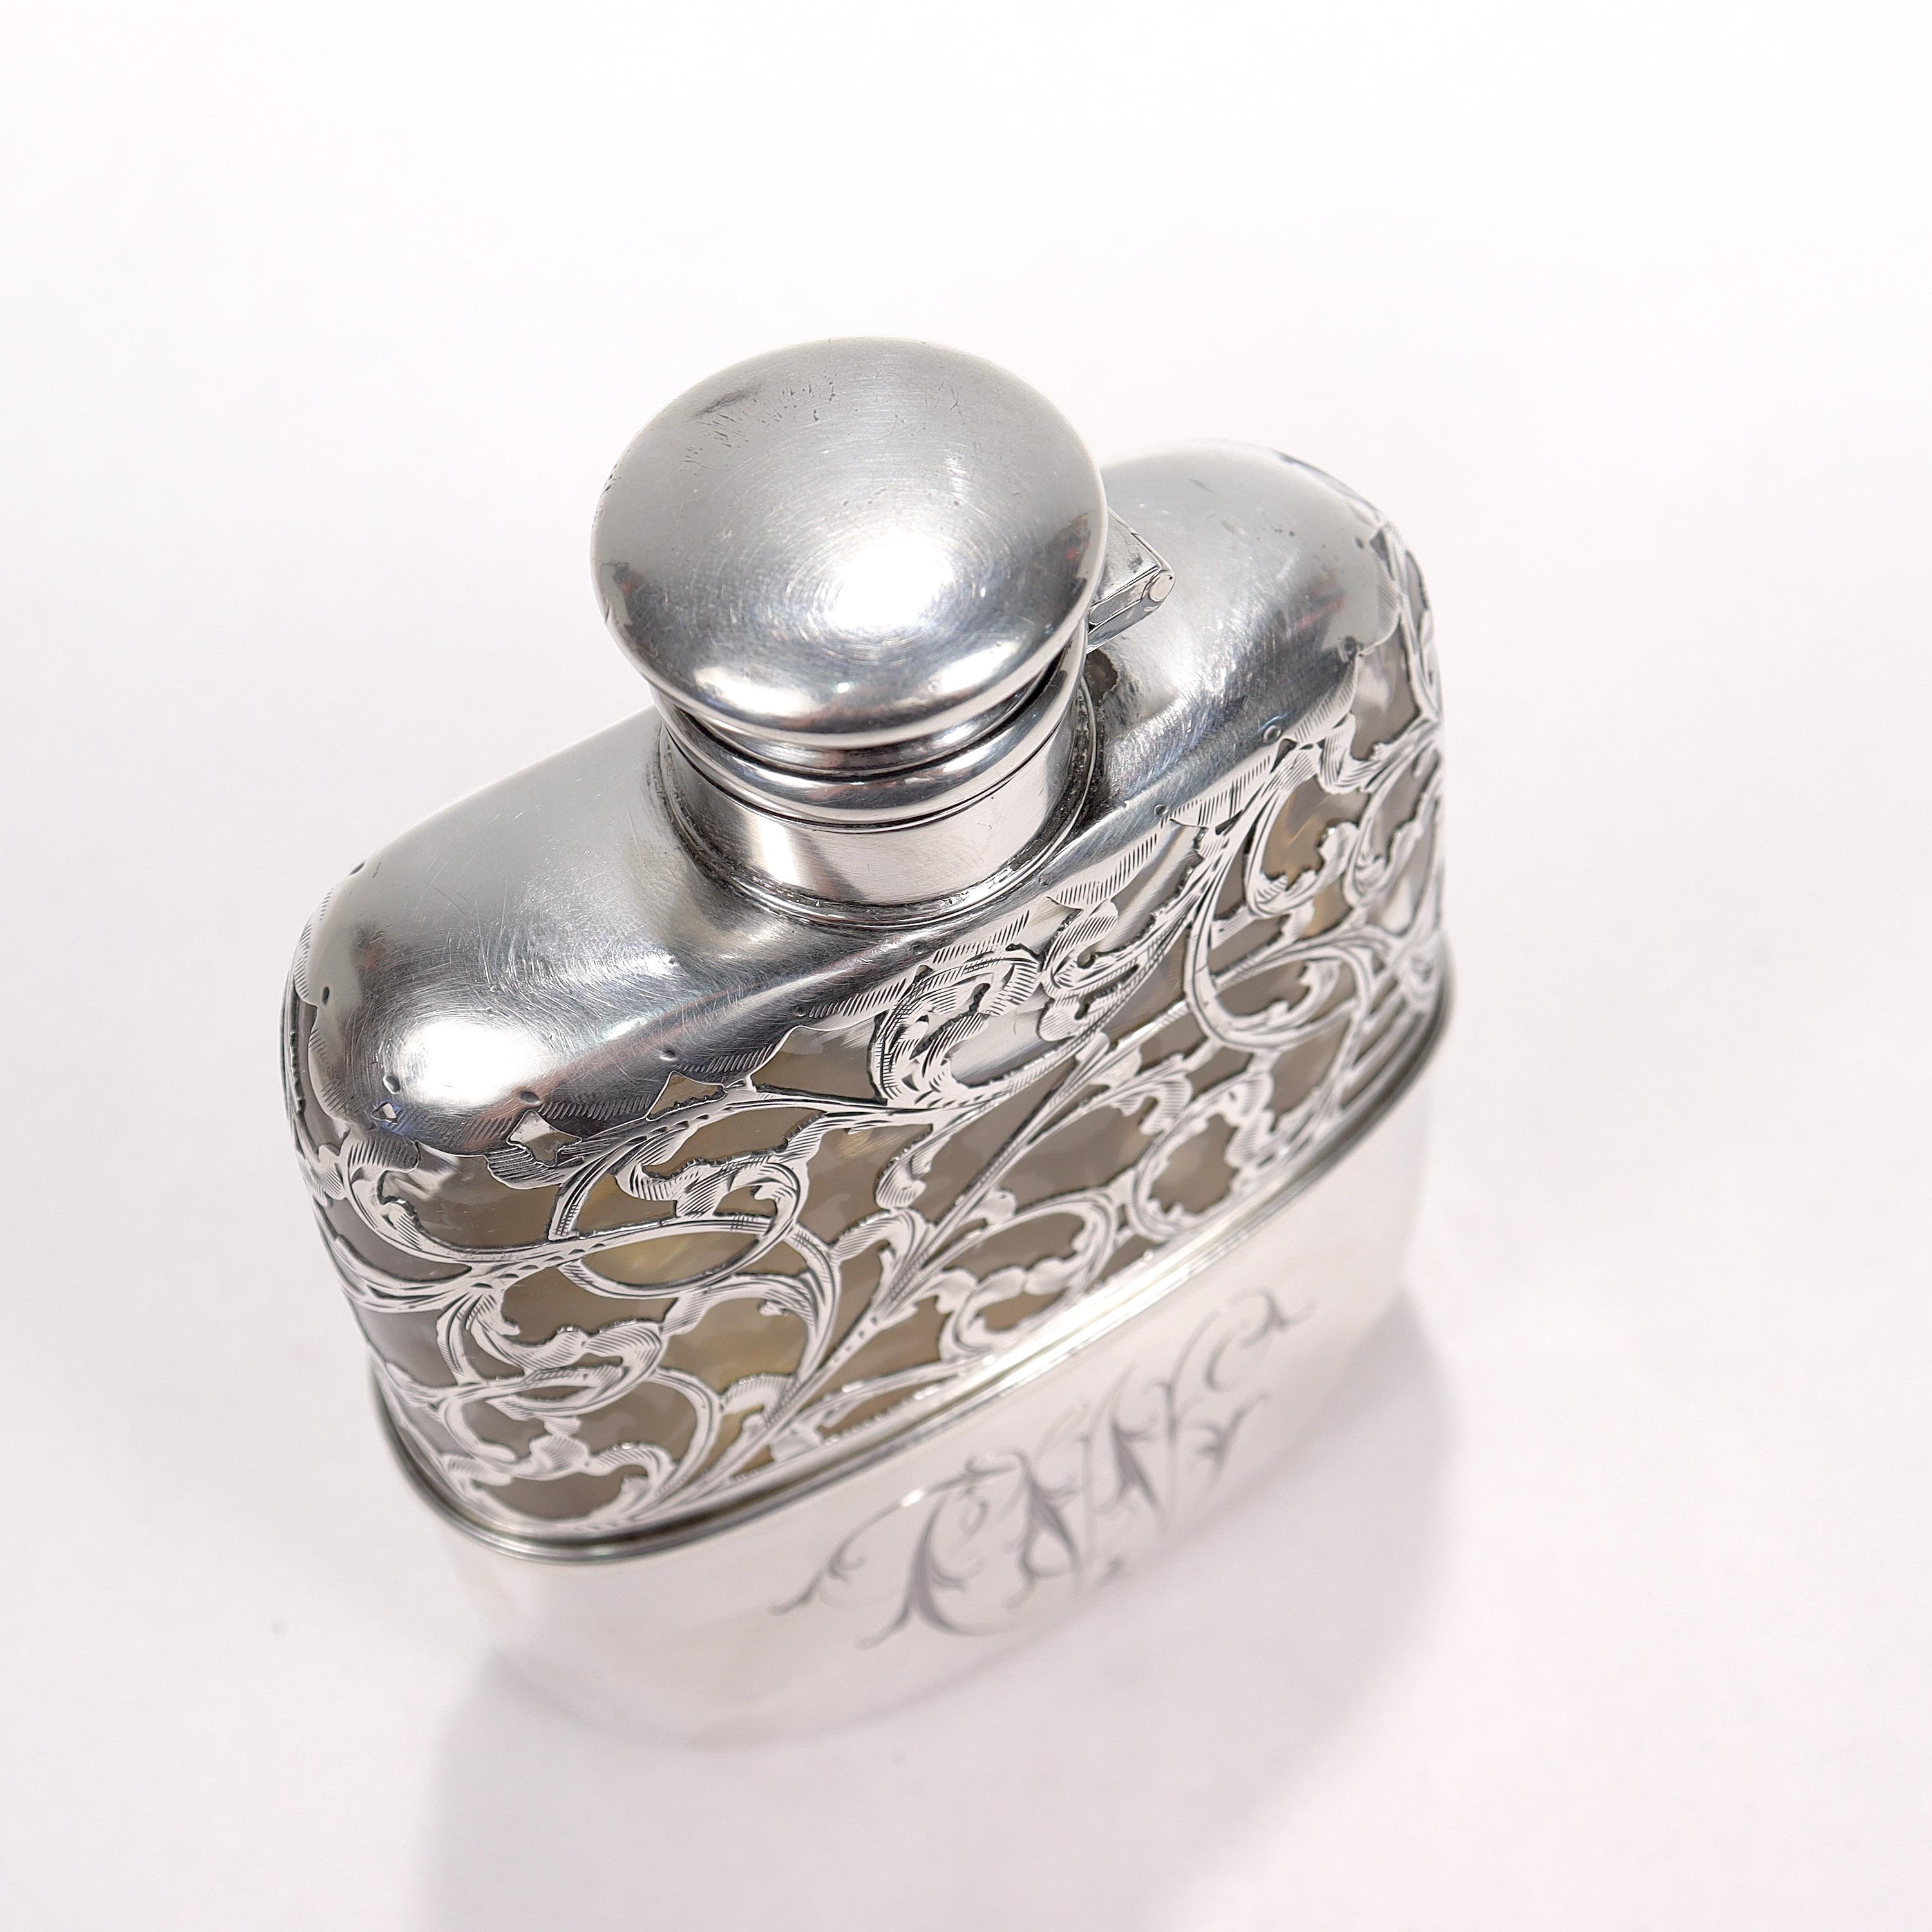 Antique Edwardian Sterling Silver Overlay Whiskey or Liquor Hip Flask 2